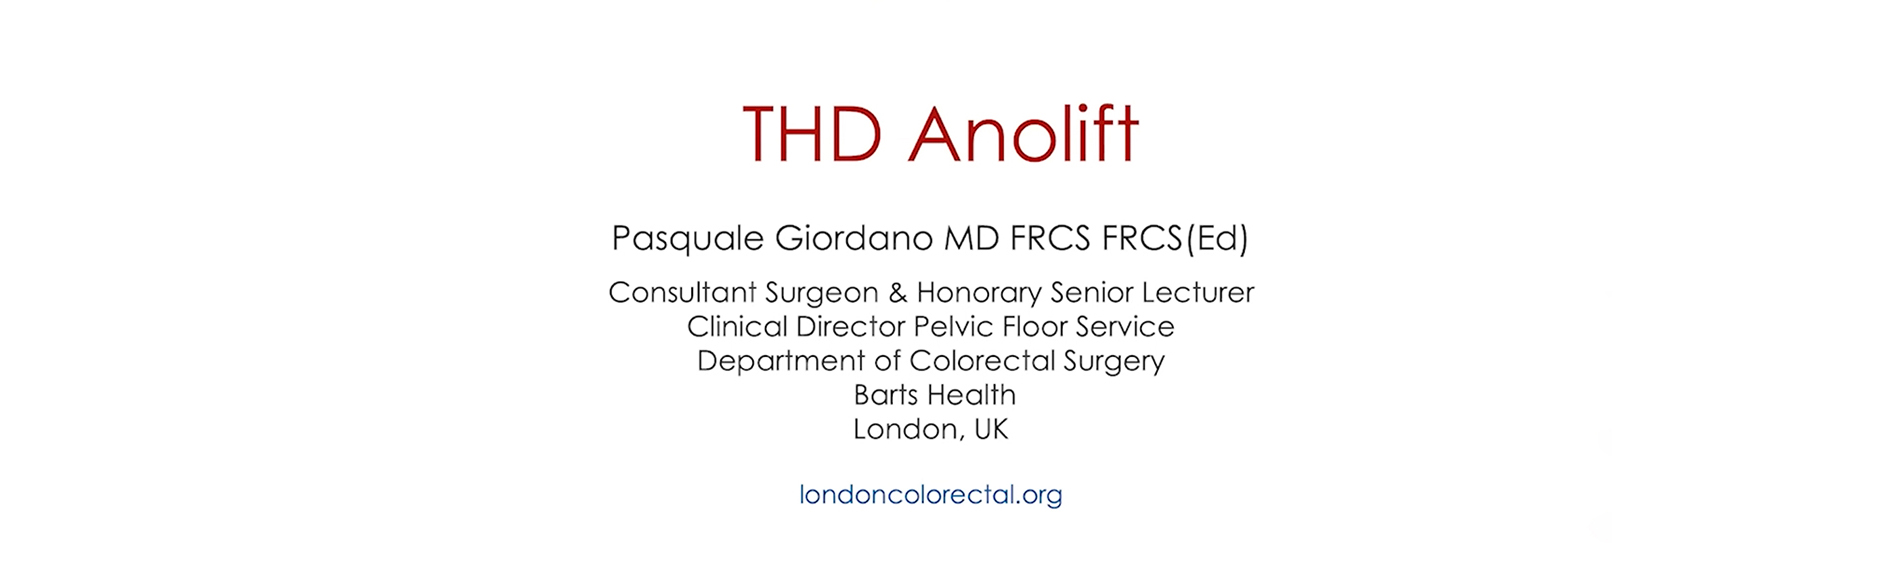 THD Masterclass on THD Anolift presented by Dr. Pasquale Giordano